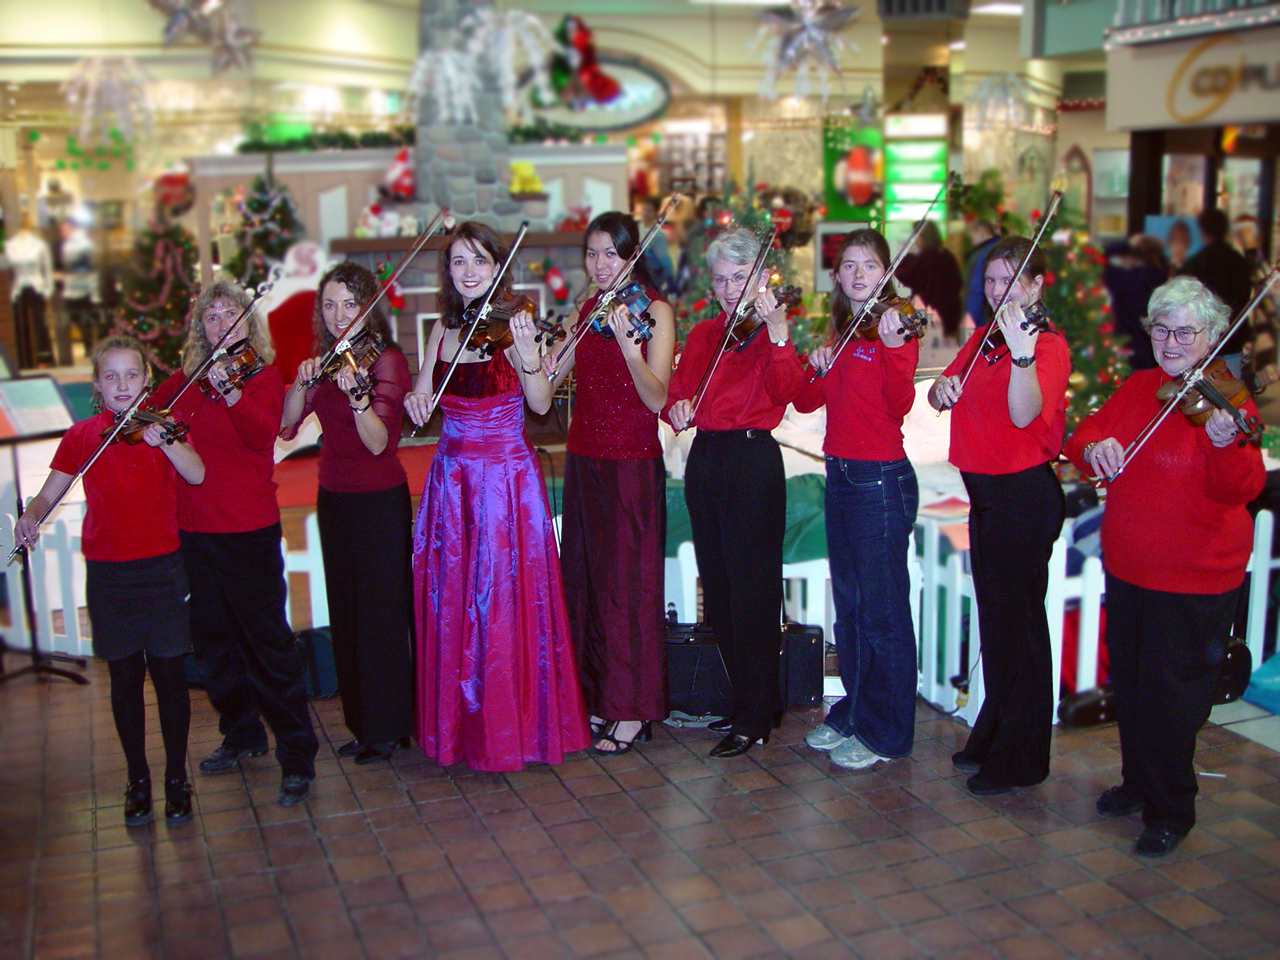 Young Rhiannon and her students wearing red and performing at a mall at Christmas in 2002